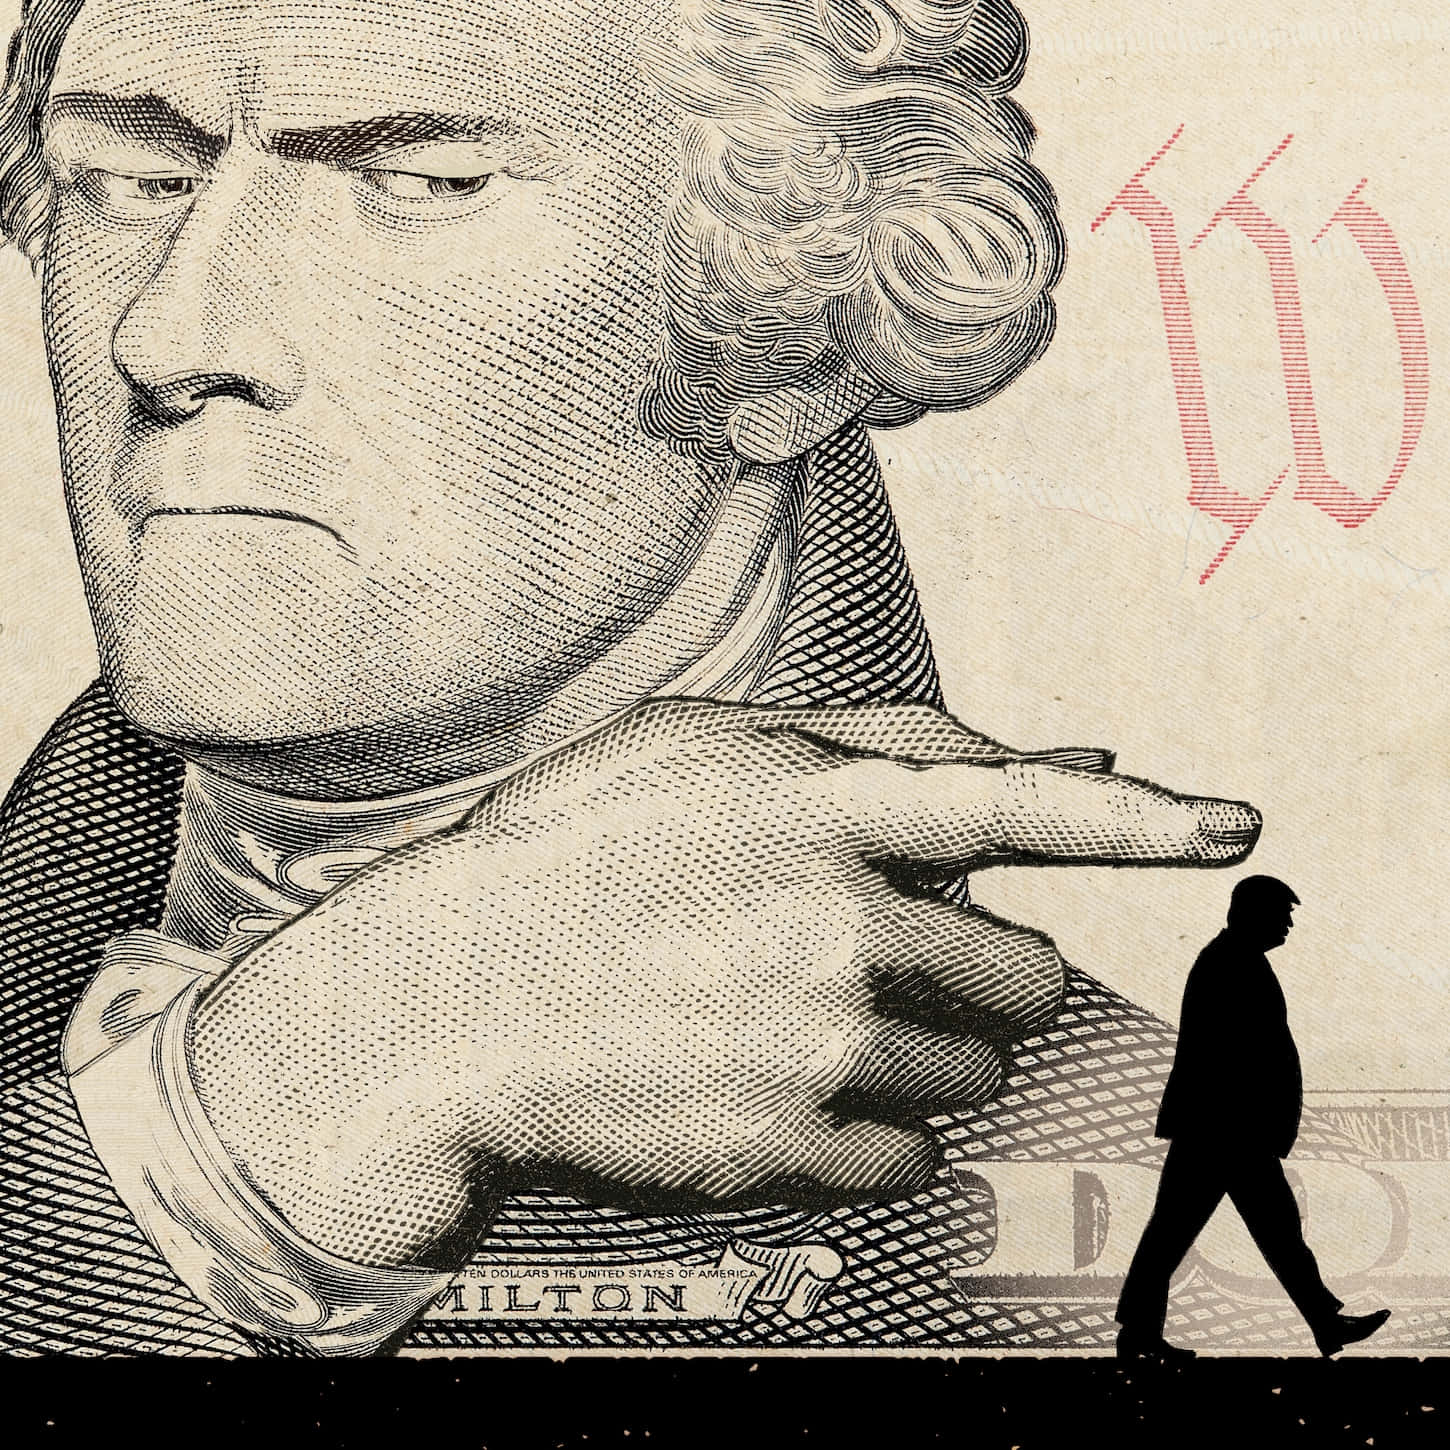 Alexander Hamilton - A Founding Father of the United States